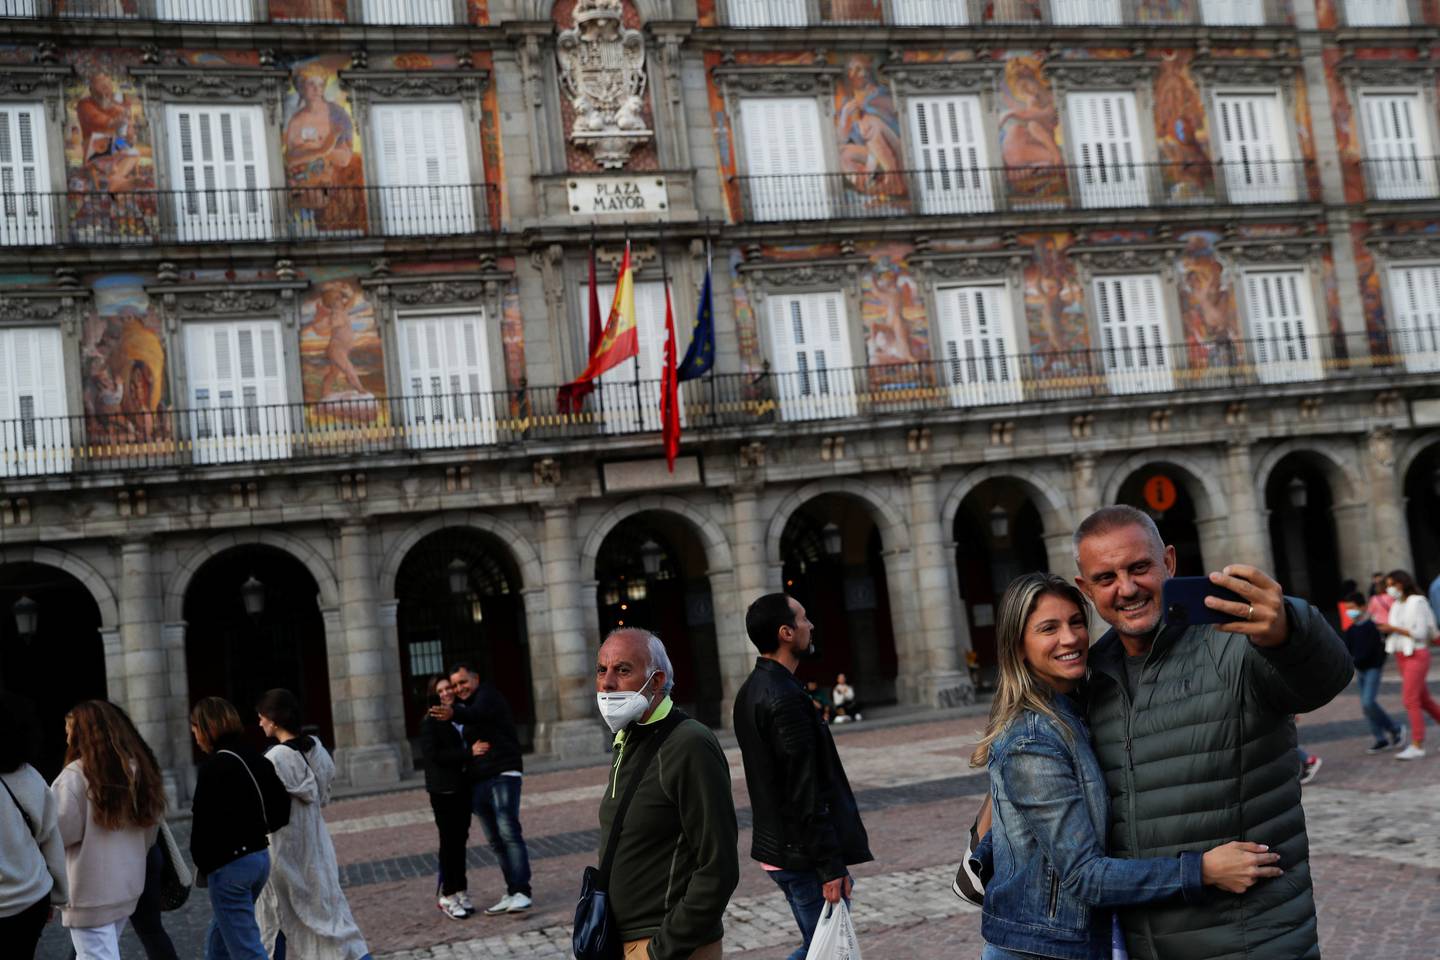 Tourists take selfies at Plaza Mayor square in Madrid, Spain, October 3, 2021. Reuters